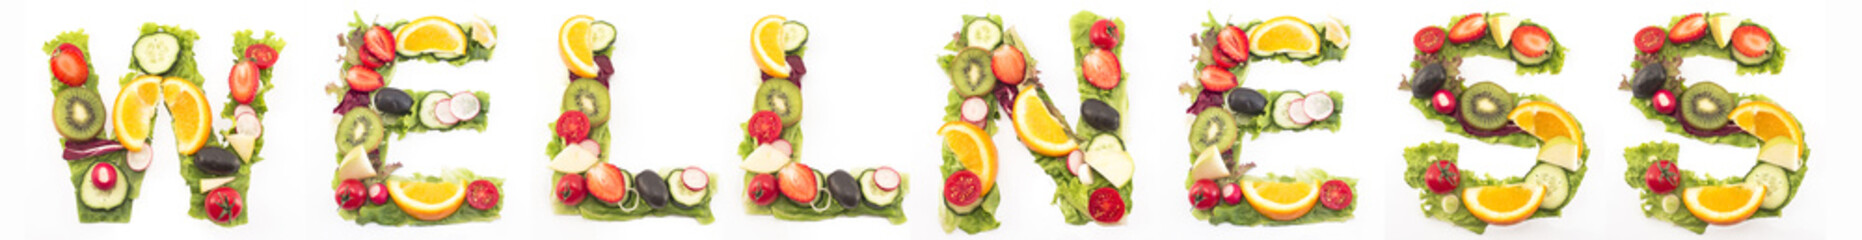 Word Wellness Made of Salad and Fruits